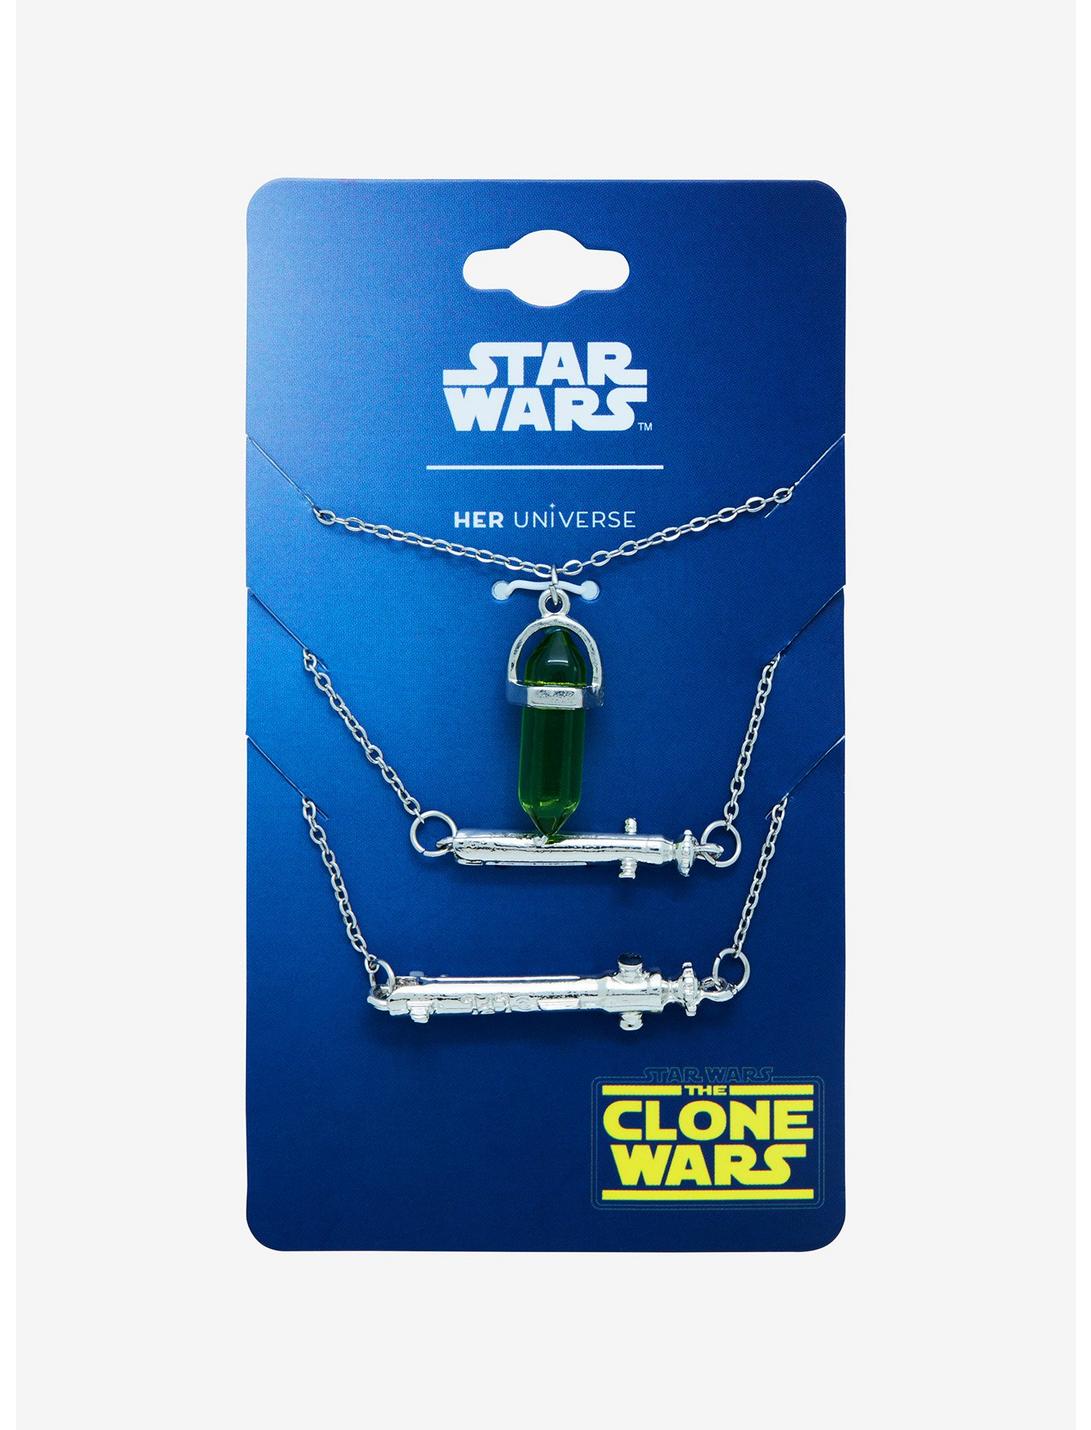 Her Universe Star Wars: The Clone Wars Ahsoka Tano Lightsaber Necklace Her Universe Exclusive, , hi-res